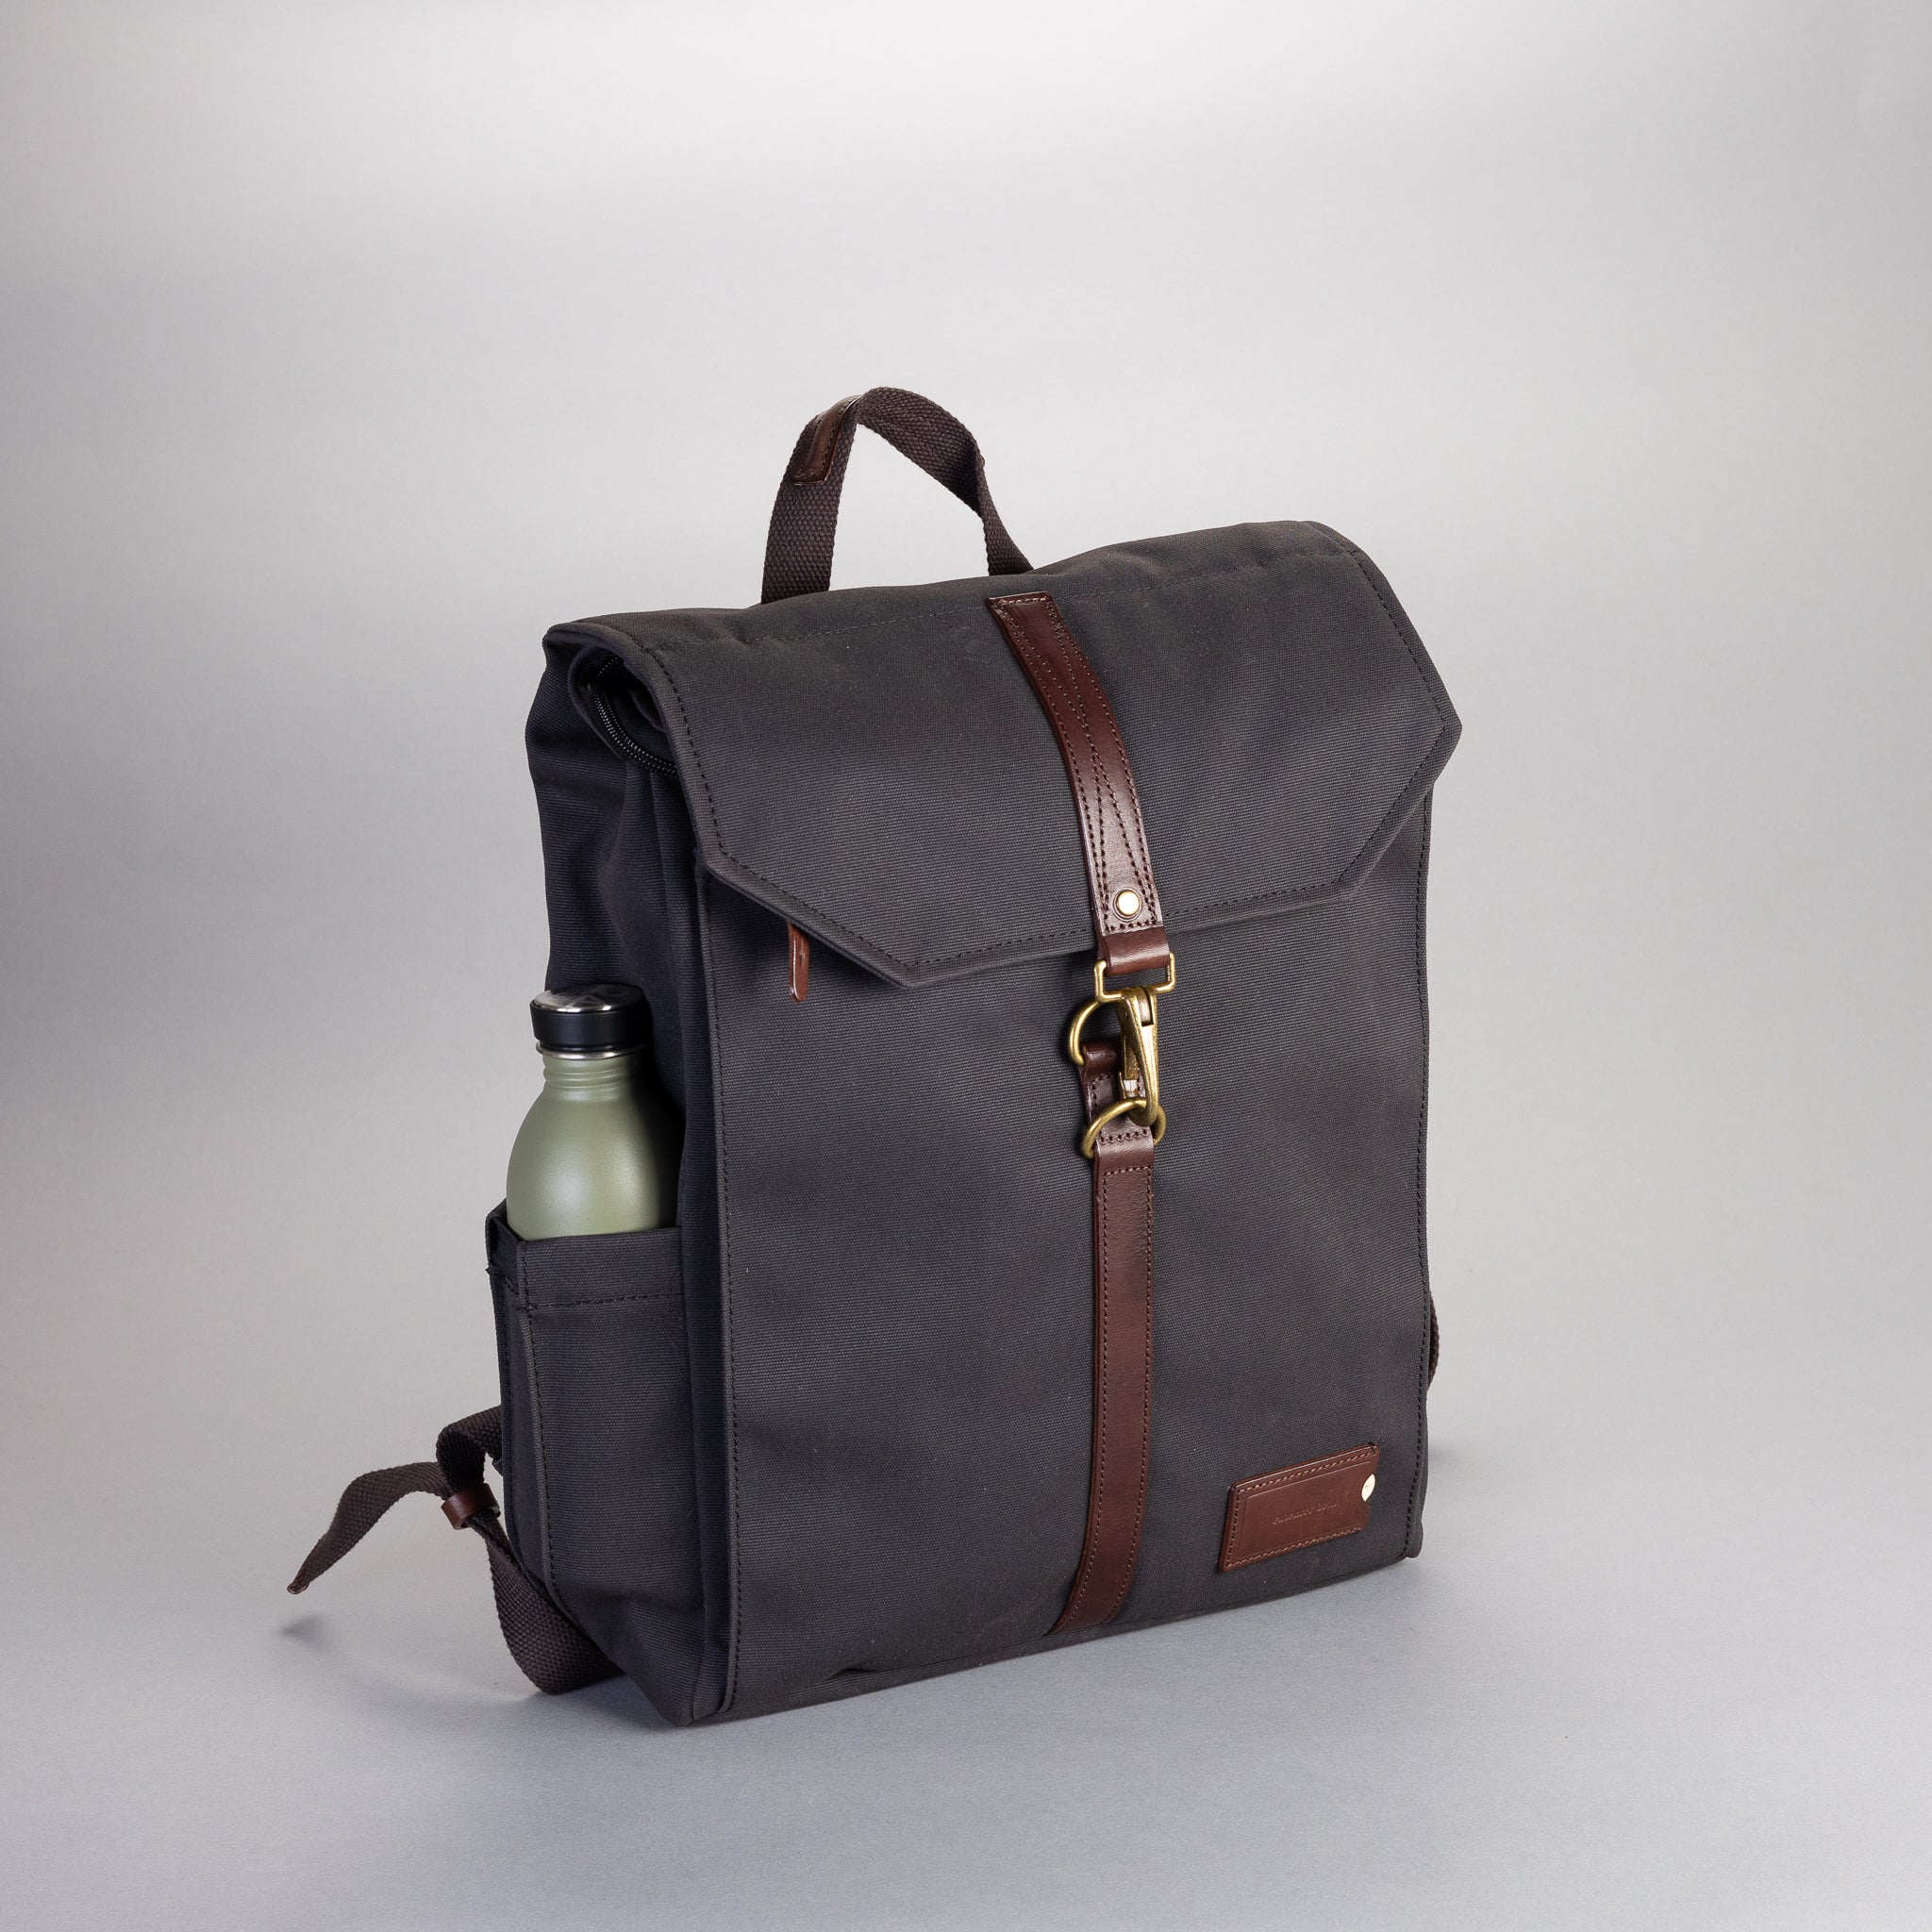 Travel gear for the global citizen. Bags made from recycled PET